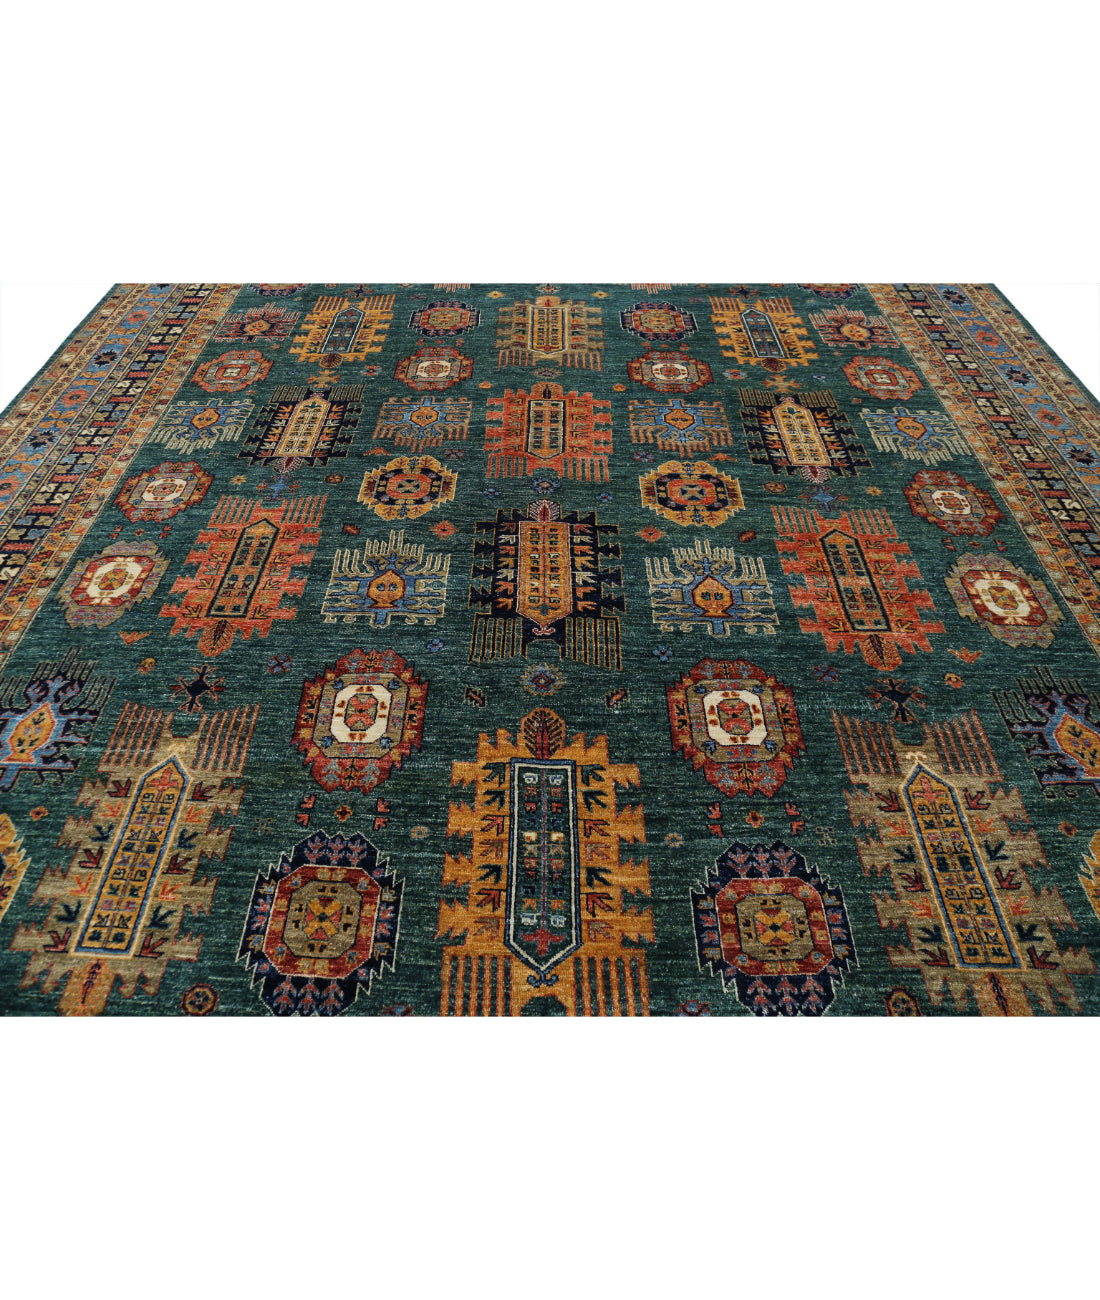 Hand Knotted Nomadic Caucasian Humna Wool Rug - 11'9'' x 14'7'' 11'9'' x 14'7'' (353 X 438) / Green / Blue